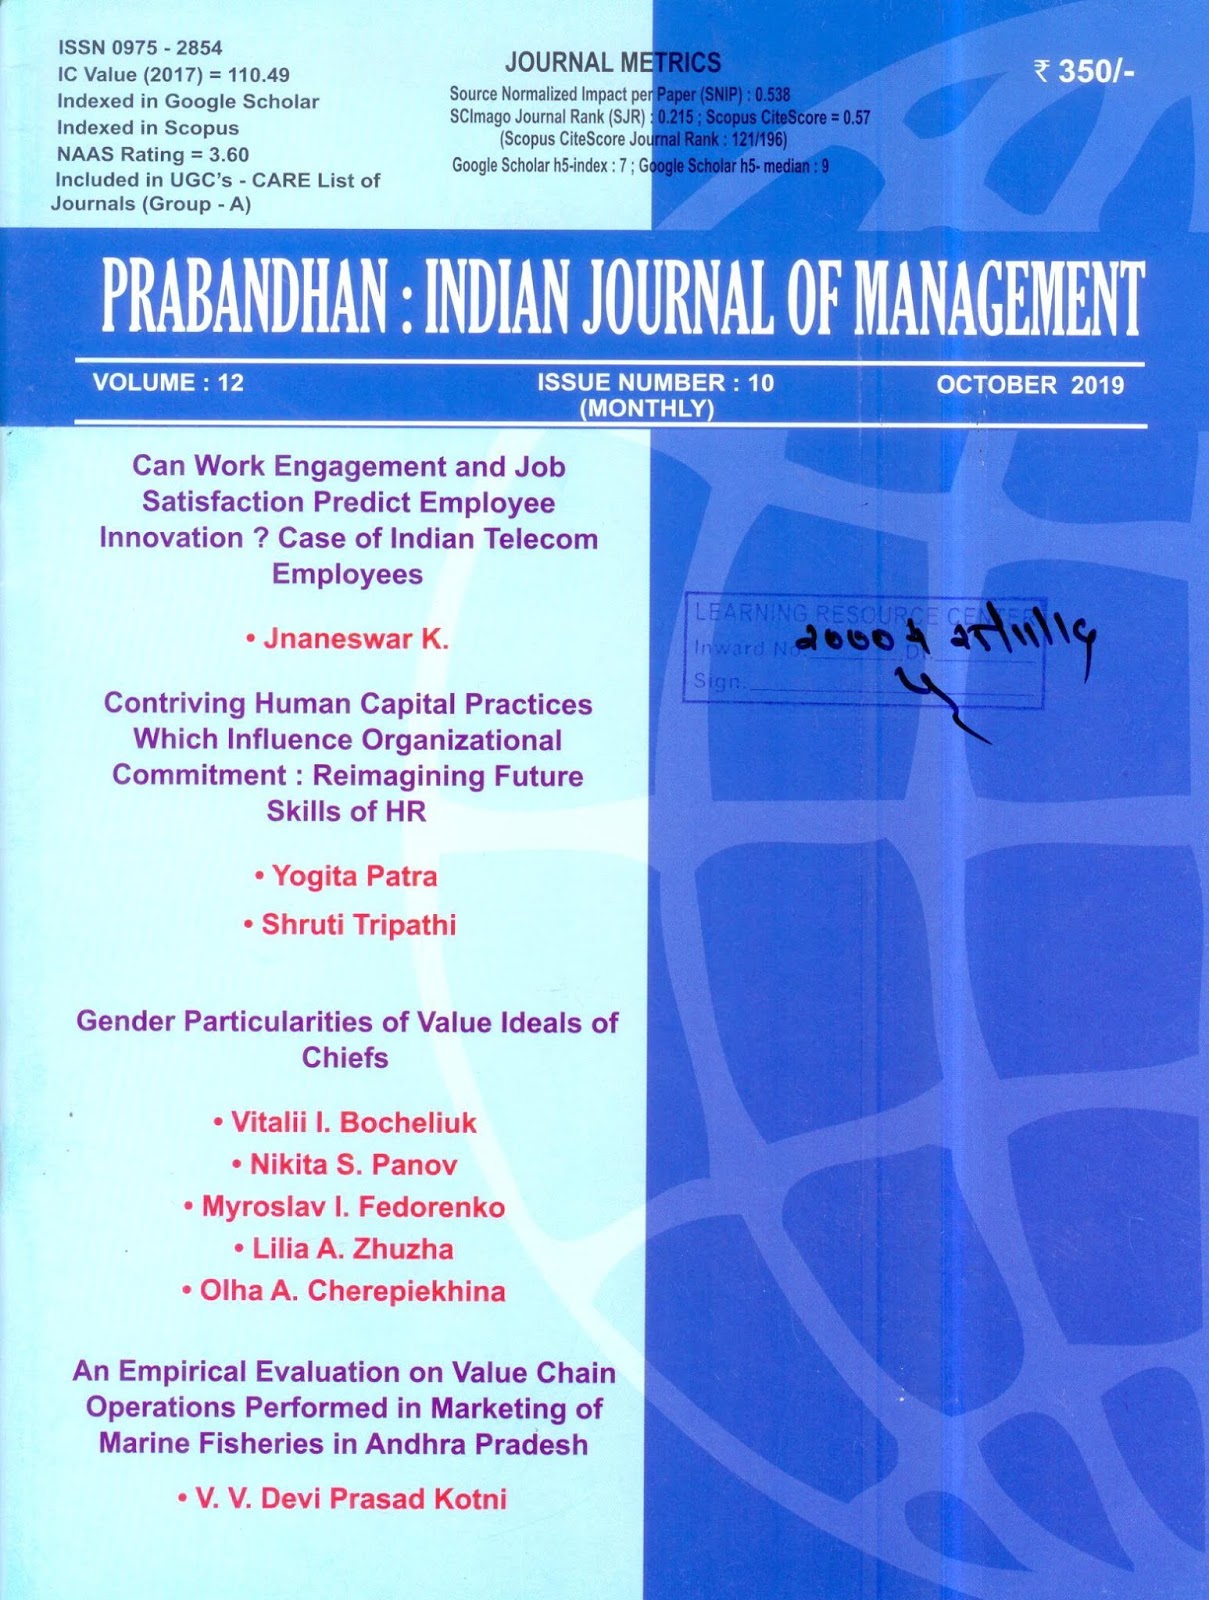 http://www.indianjournalofmanagement.com/index.php/pijom/issue/view/8665